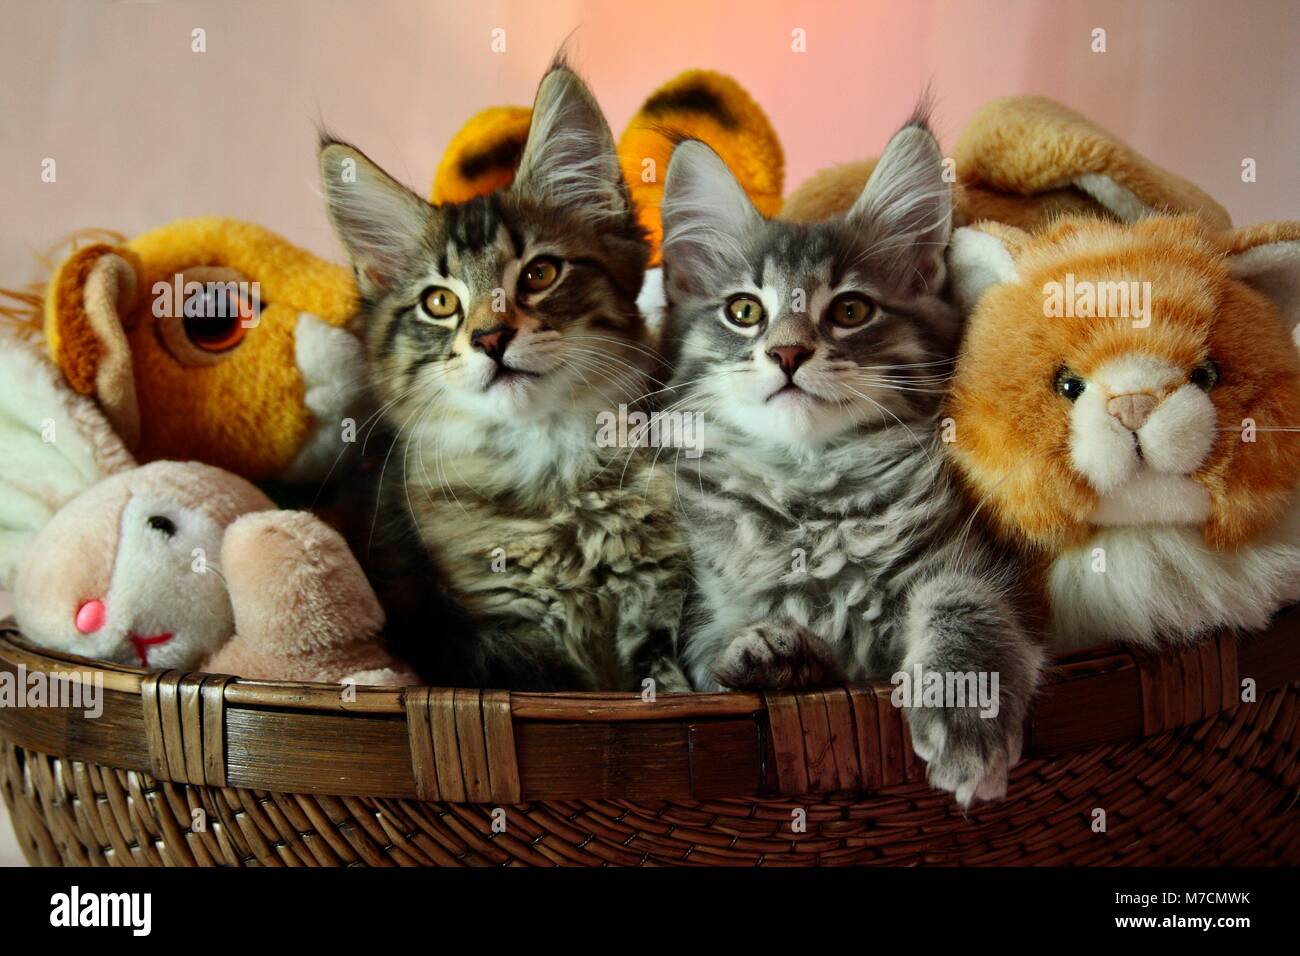 Norwegian forest cat kittens in a basket with plush toys Stock Photo